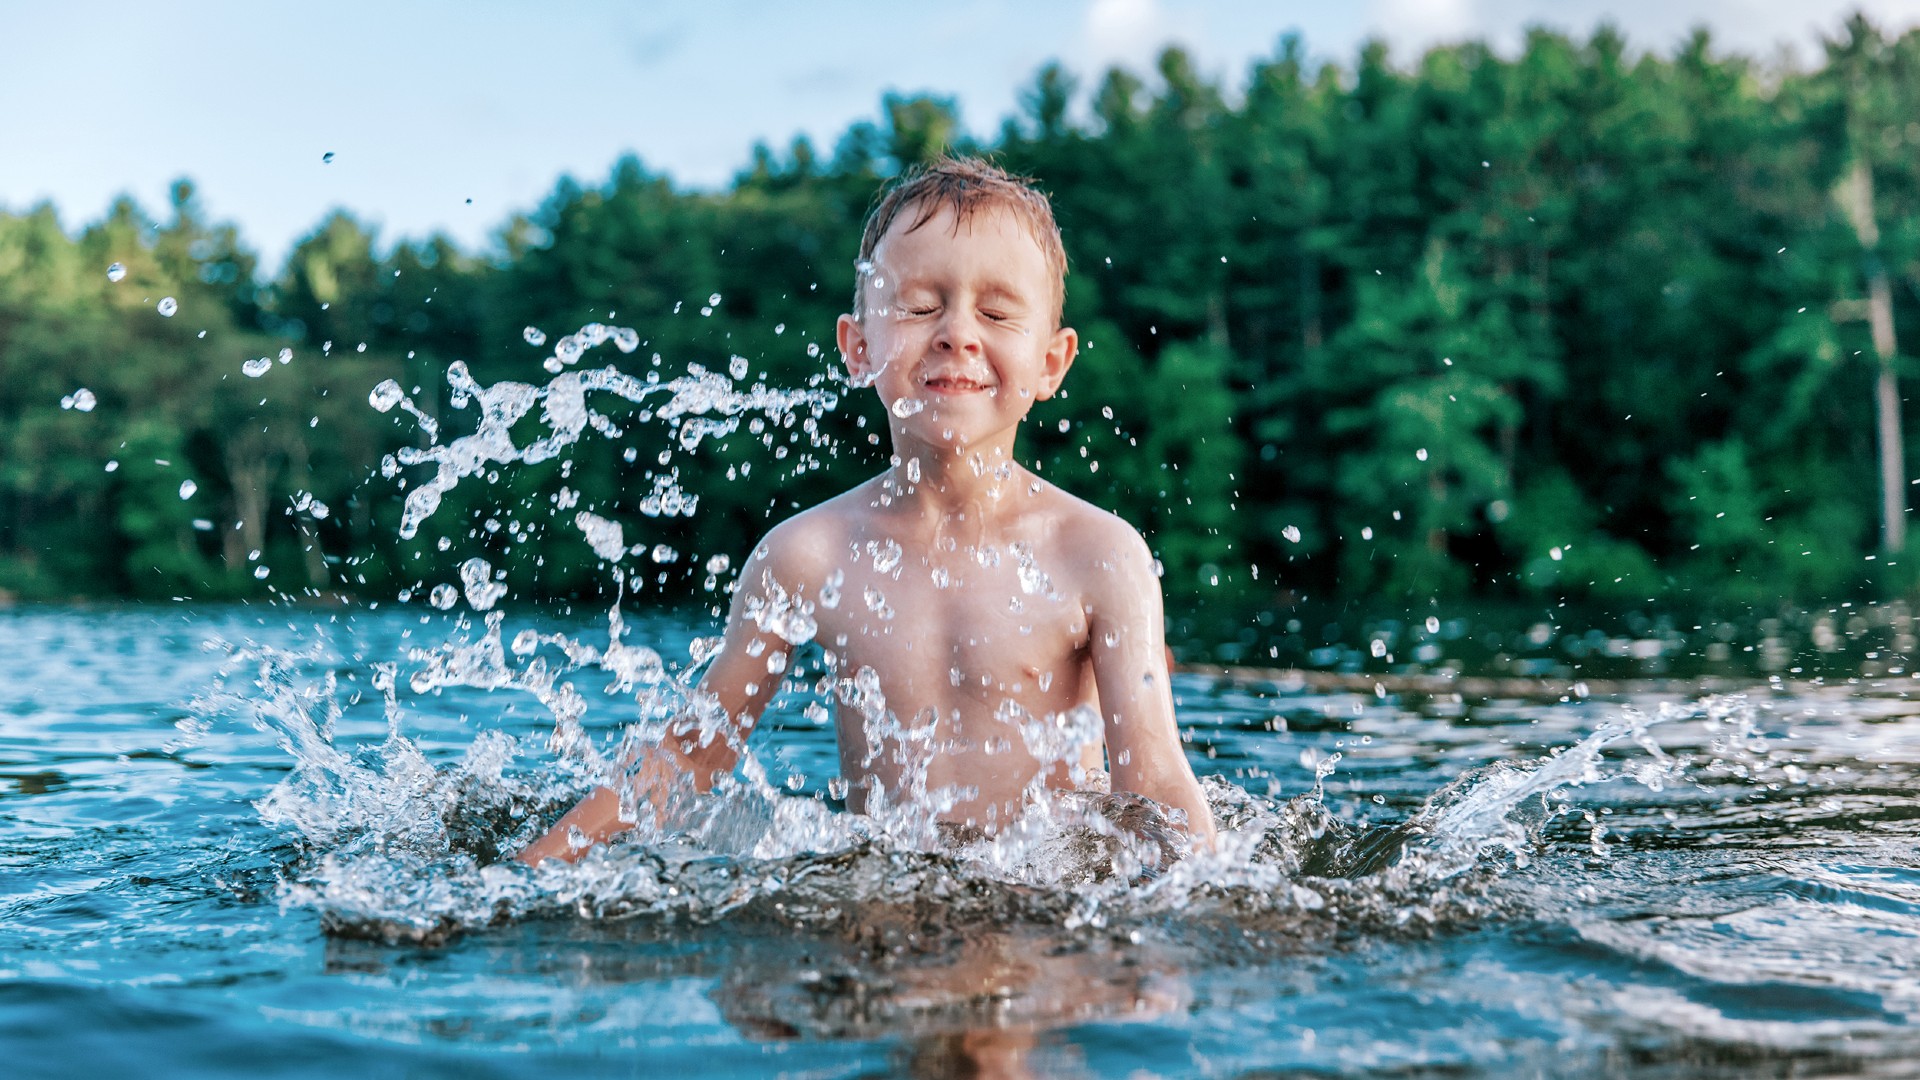 Young boy is shown splashing water in a lake. He has his eyes closed as he splashed. Woodland is shown in the background behind the lake